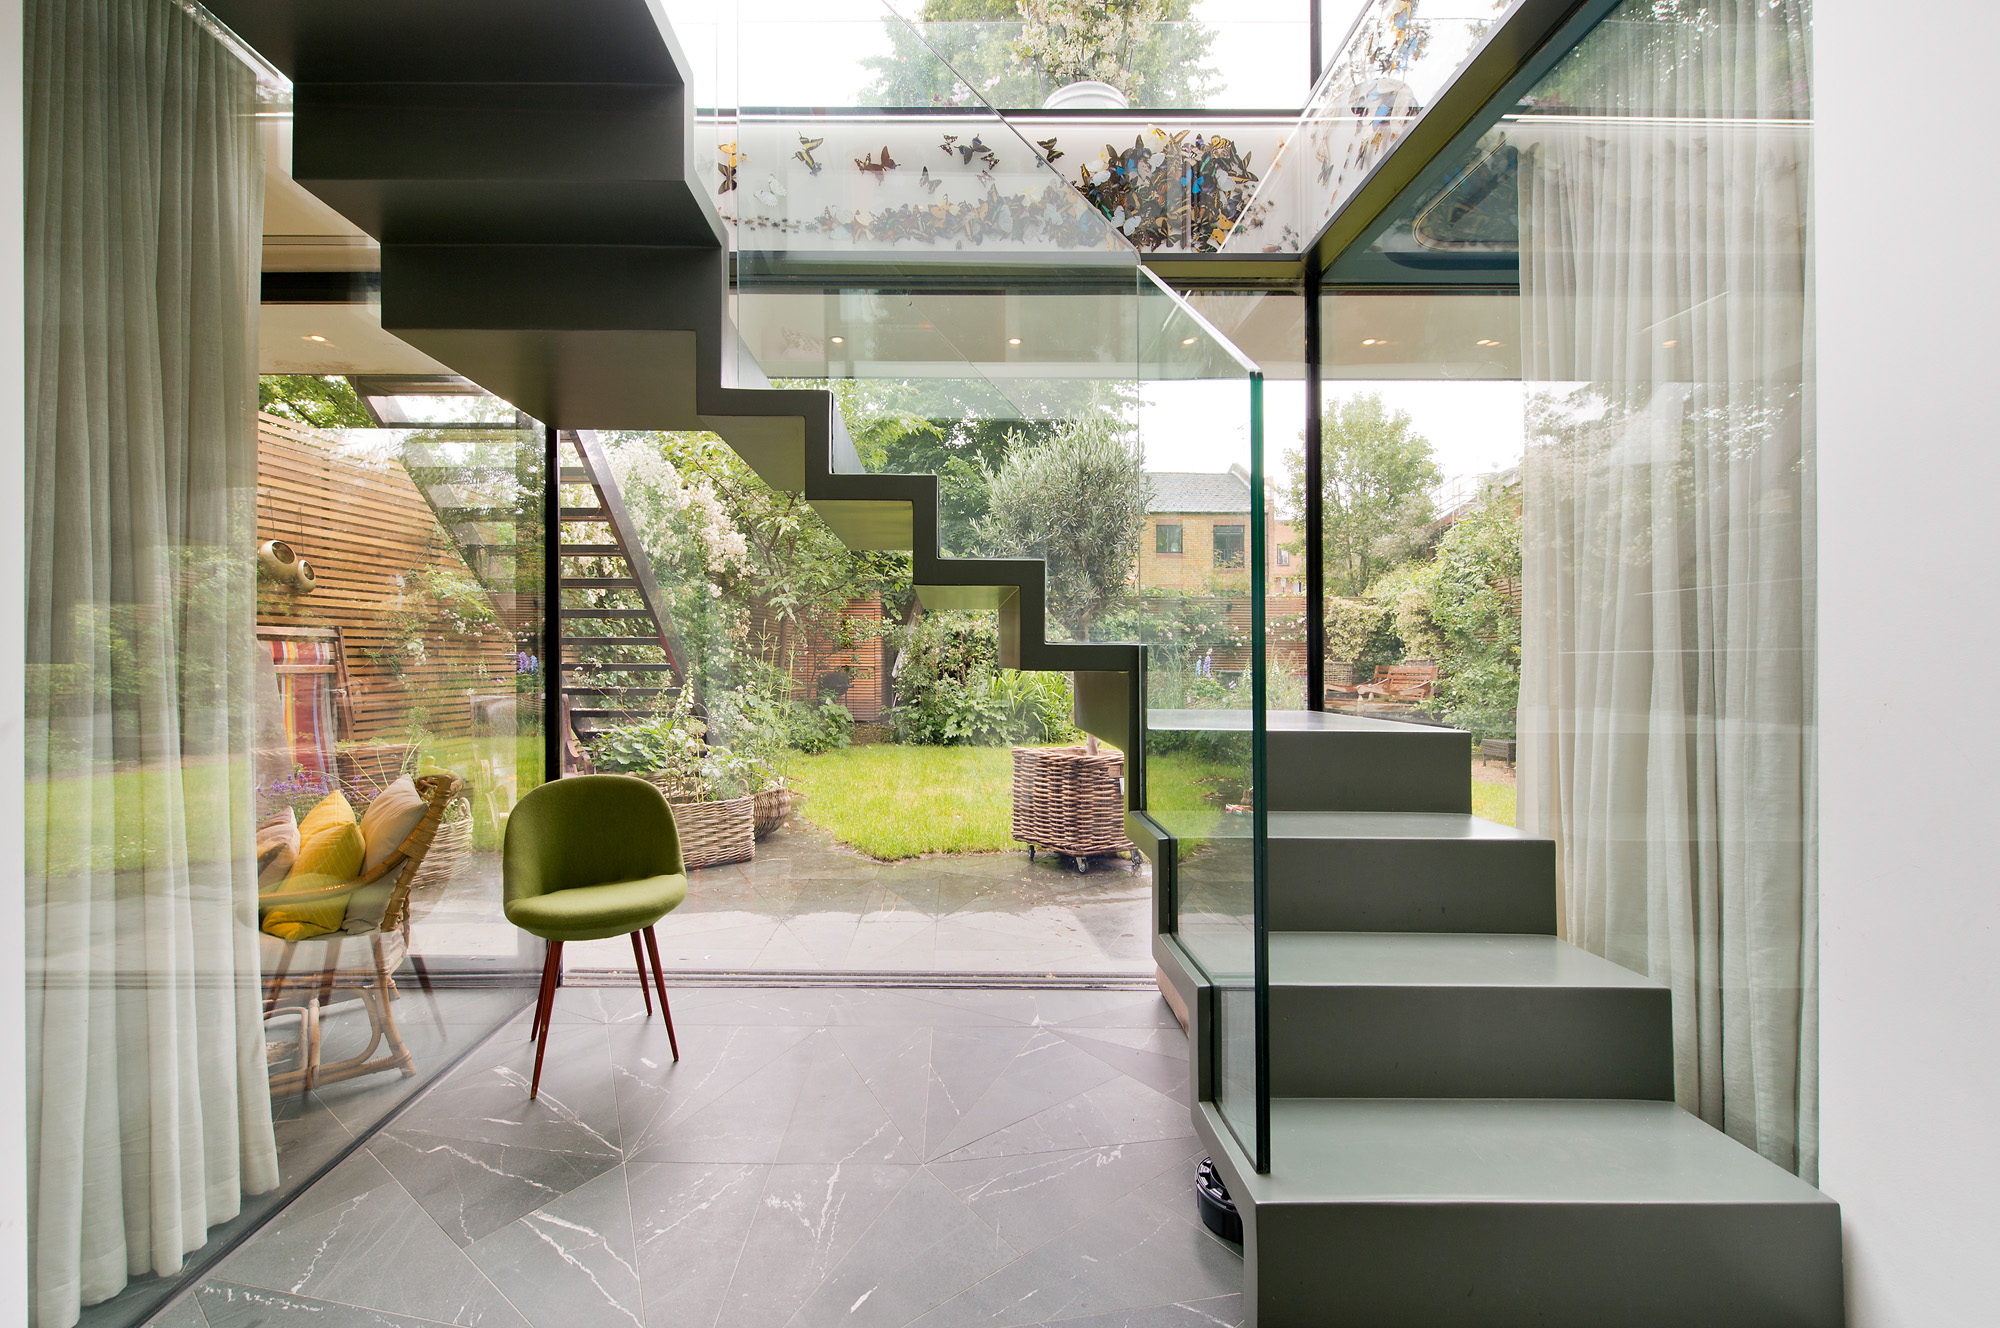 Fr Sale: Tavistock Road Notting Hill W11 Floating staircase and garden